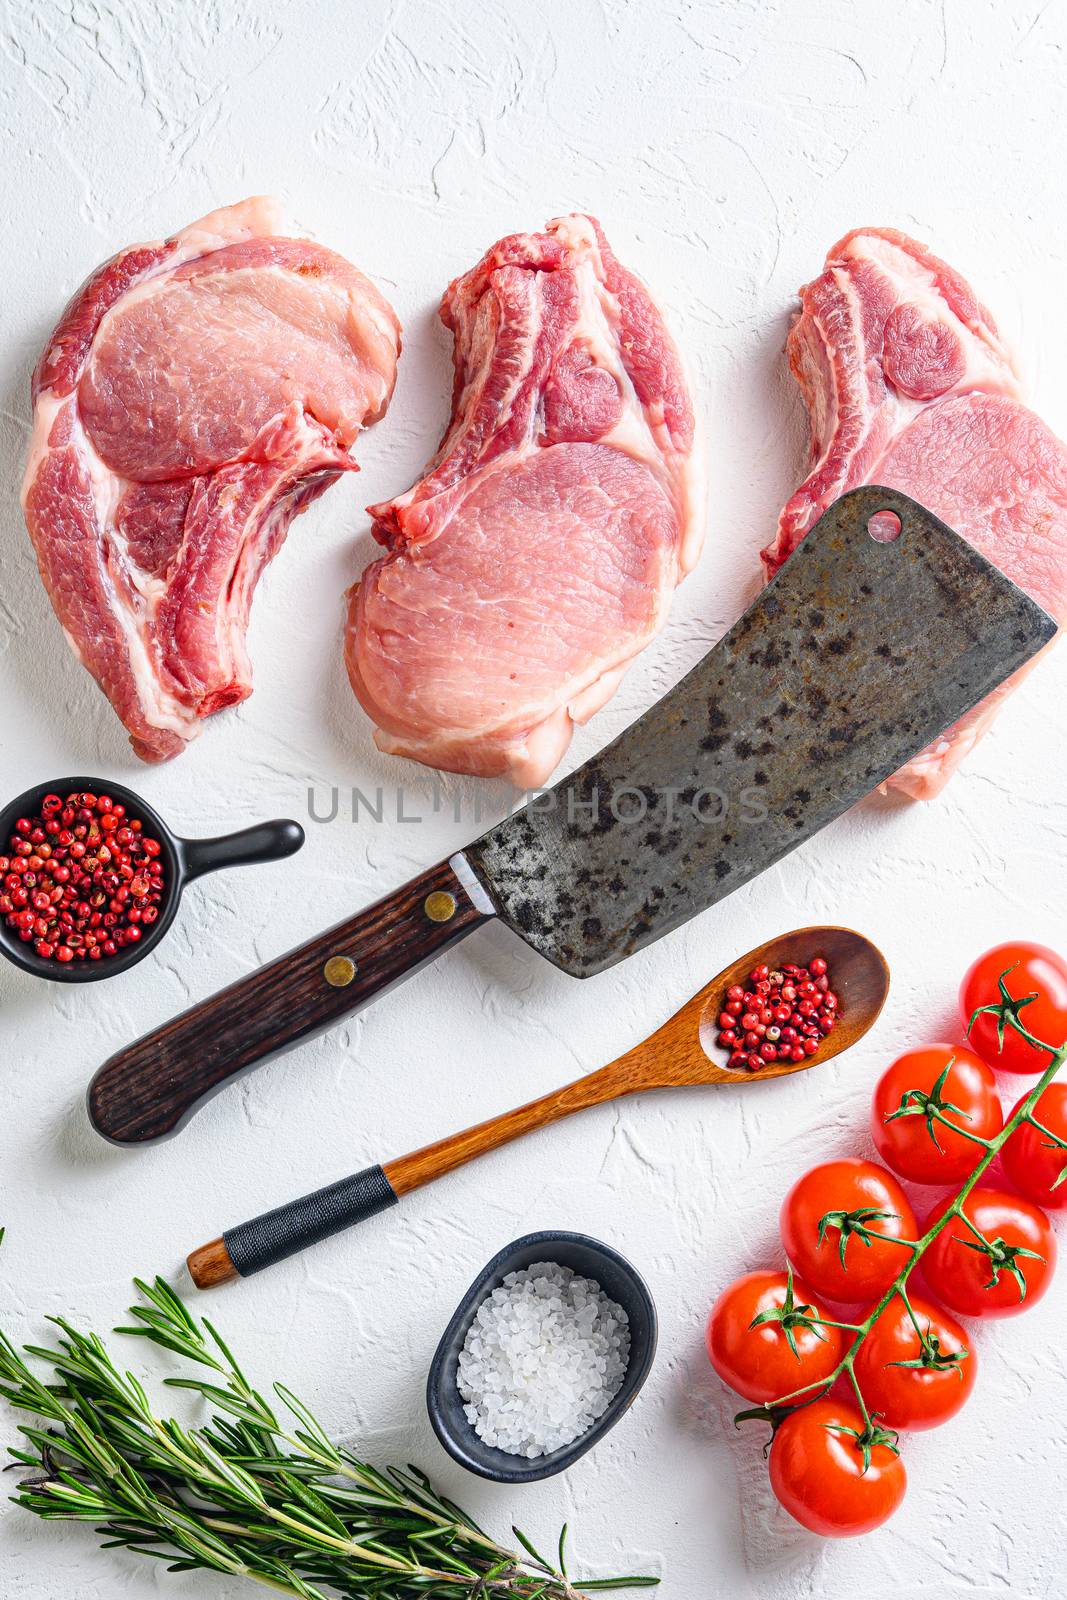 Set for bio grilling butcher cleaver over organic bio Raw pork chops , baking or frying, textured white background. vertical top view layflat.